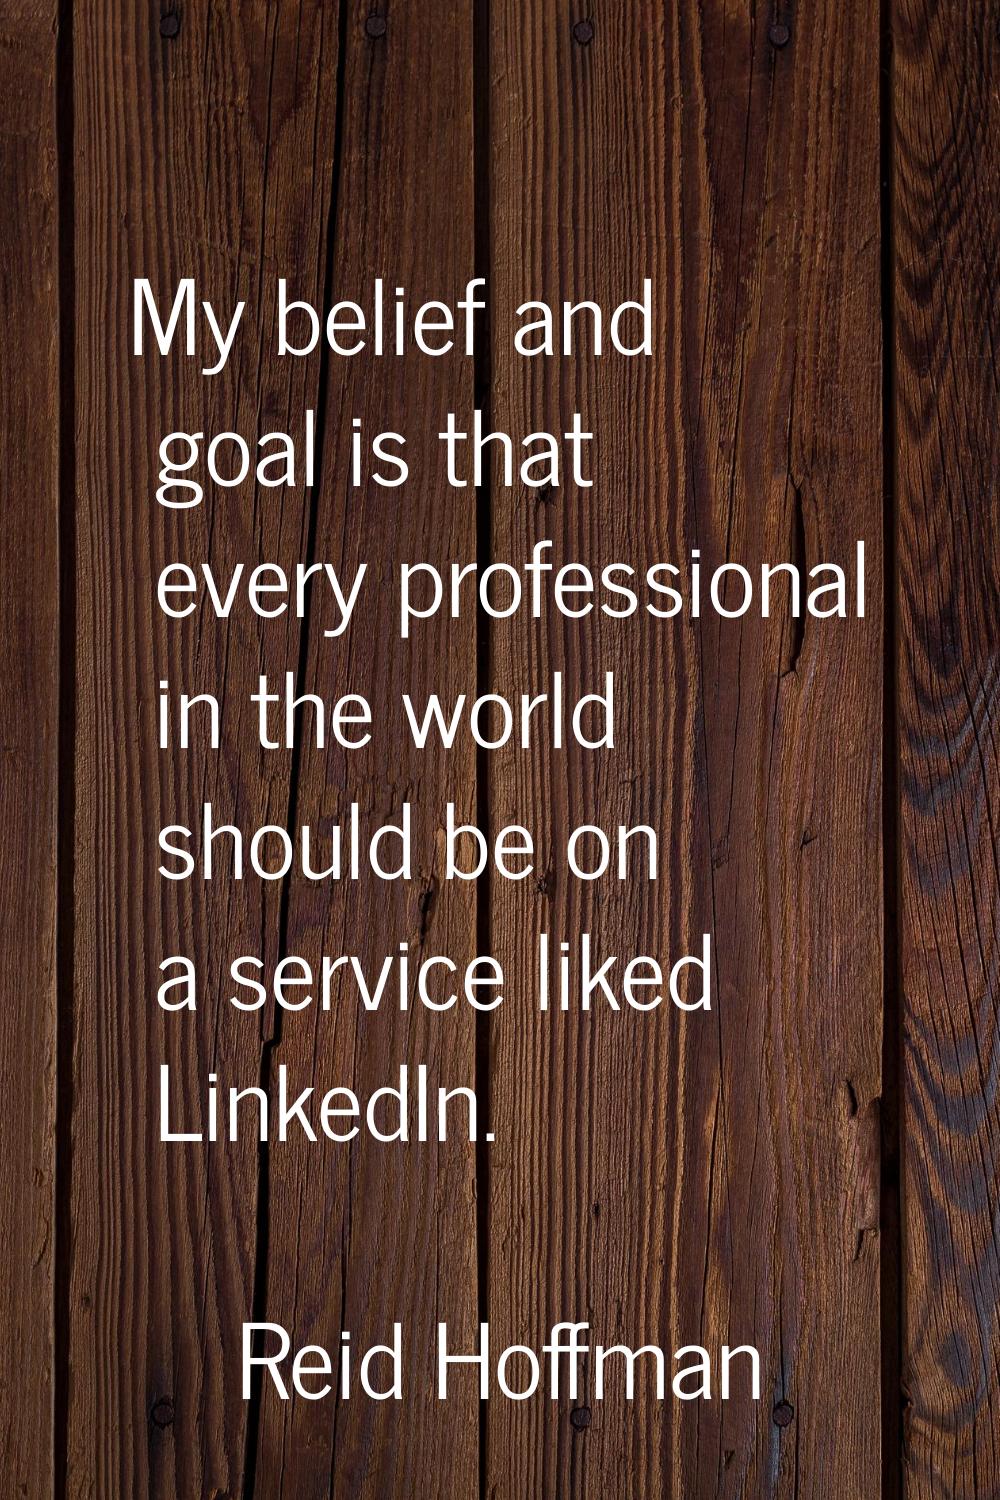 My belief and goal is that every professional in the world should be on a service liked LinkedIn.